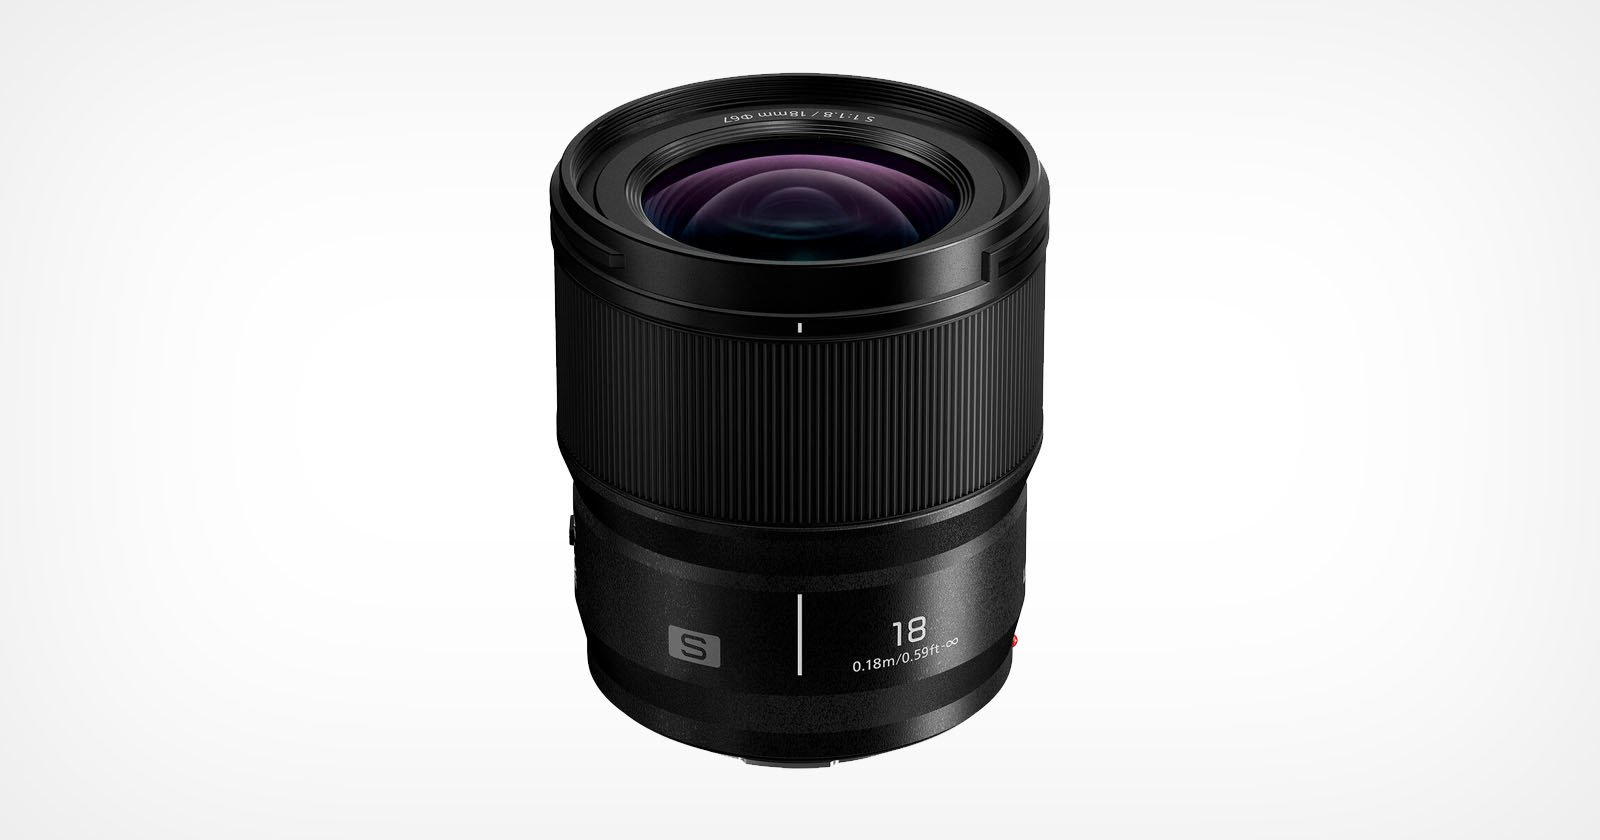 Panasonic Adds a New 18mm f/1.8 to its L-Mount Lens Lineup